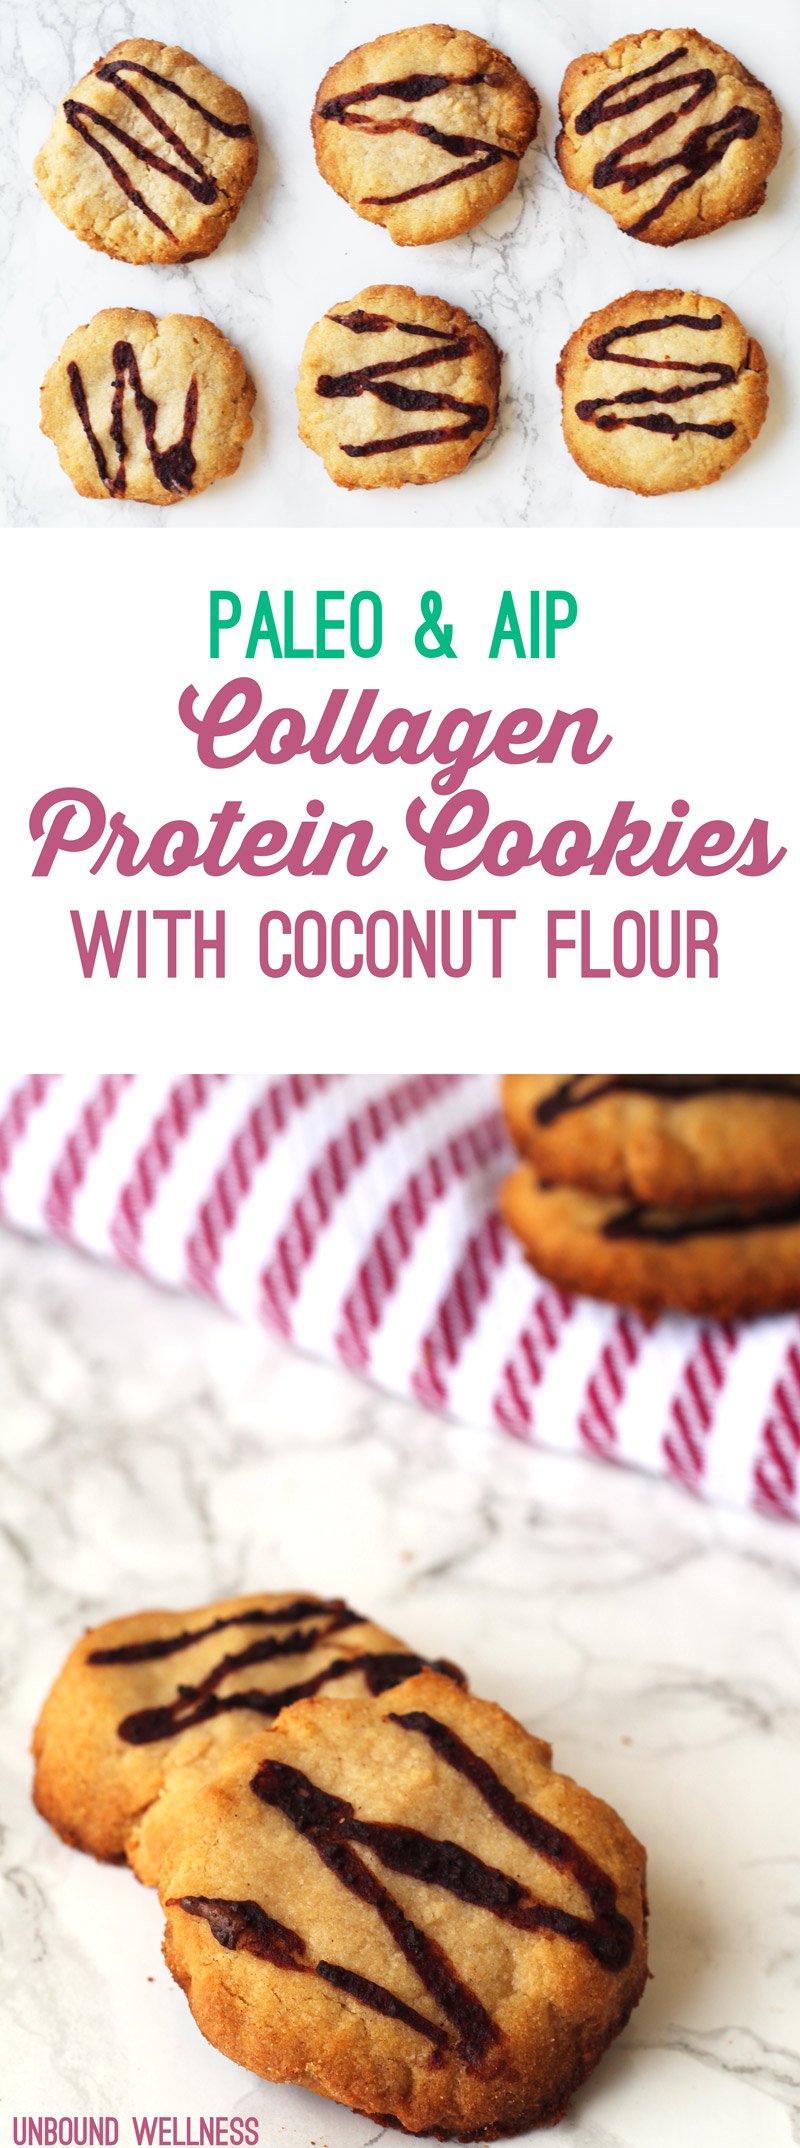 Collagen Protein Cookies with Coconut Flour (paleo, AIP)